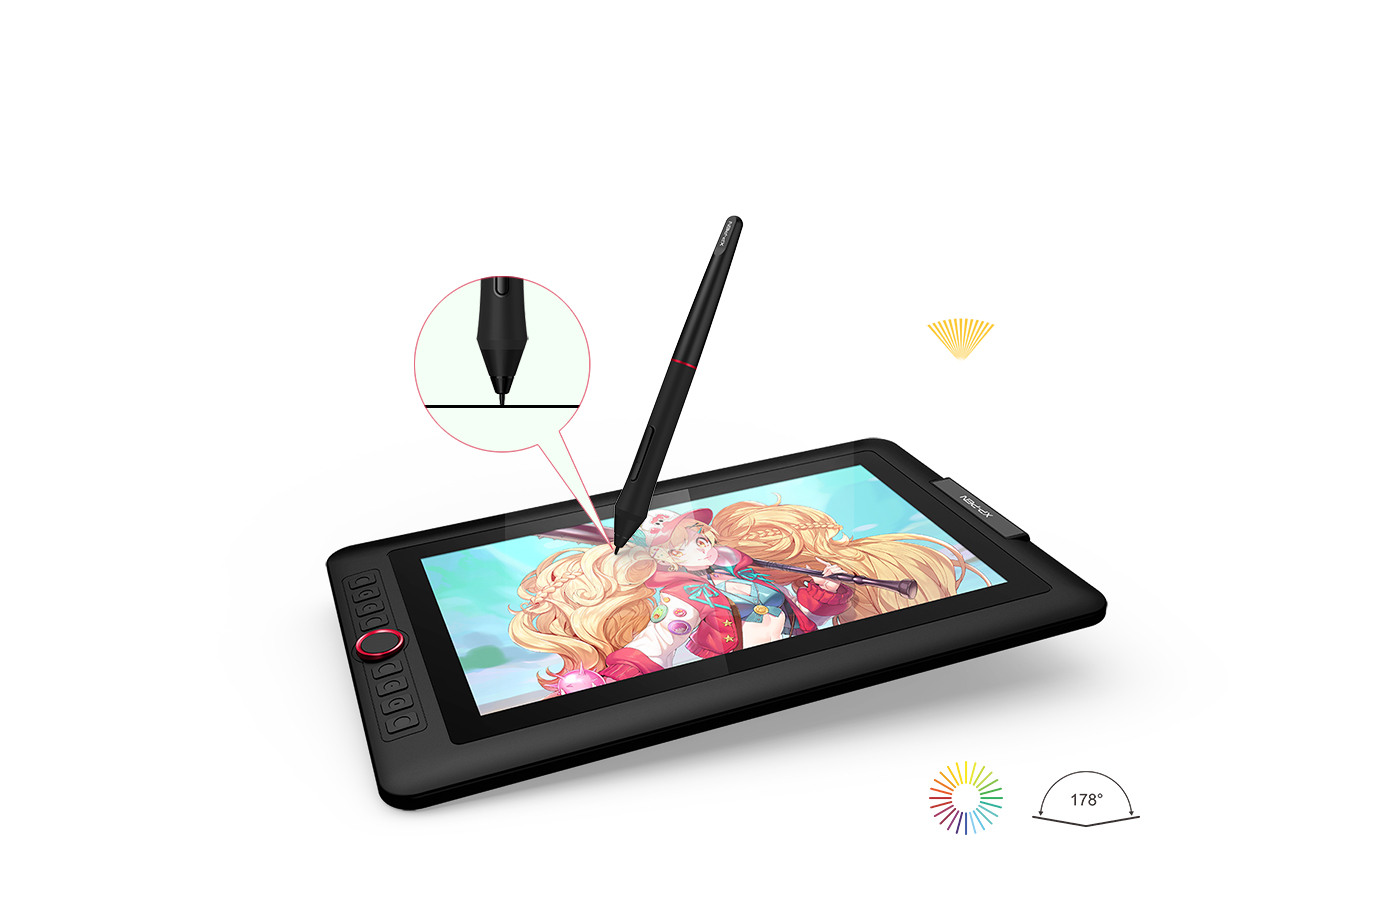 Artist 13.3 Pro affordable display graphic tablet | XPPen